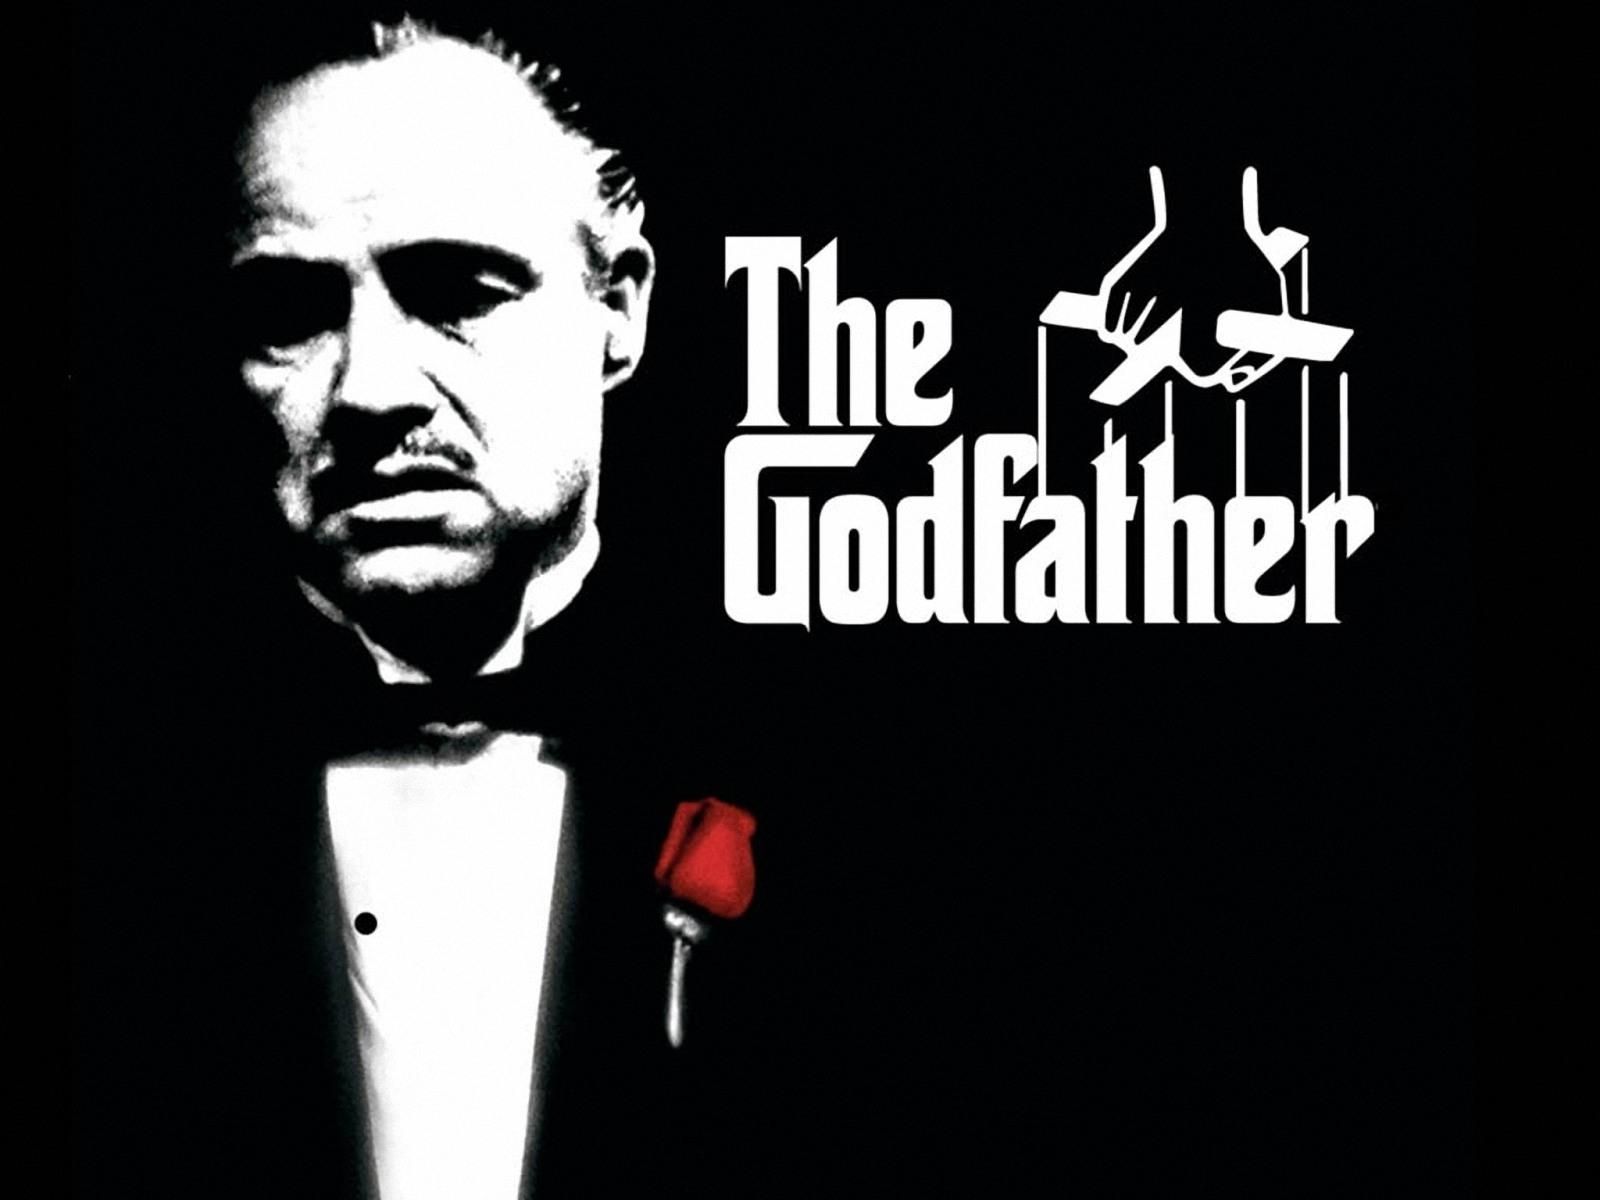 godfather wallpaper Wallpapers - Free godfather wallpaper ...